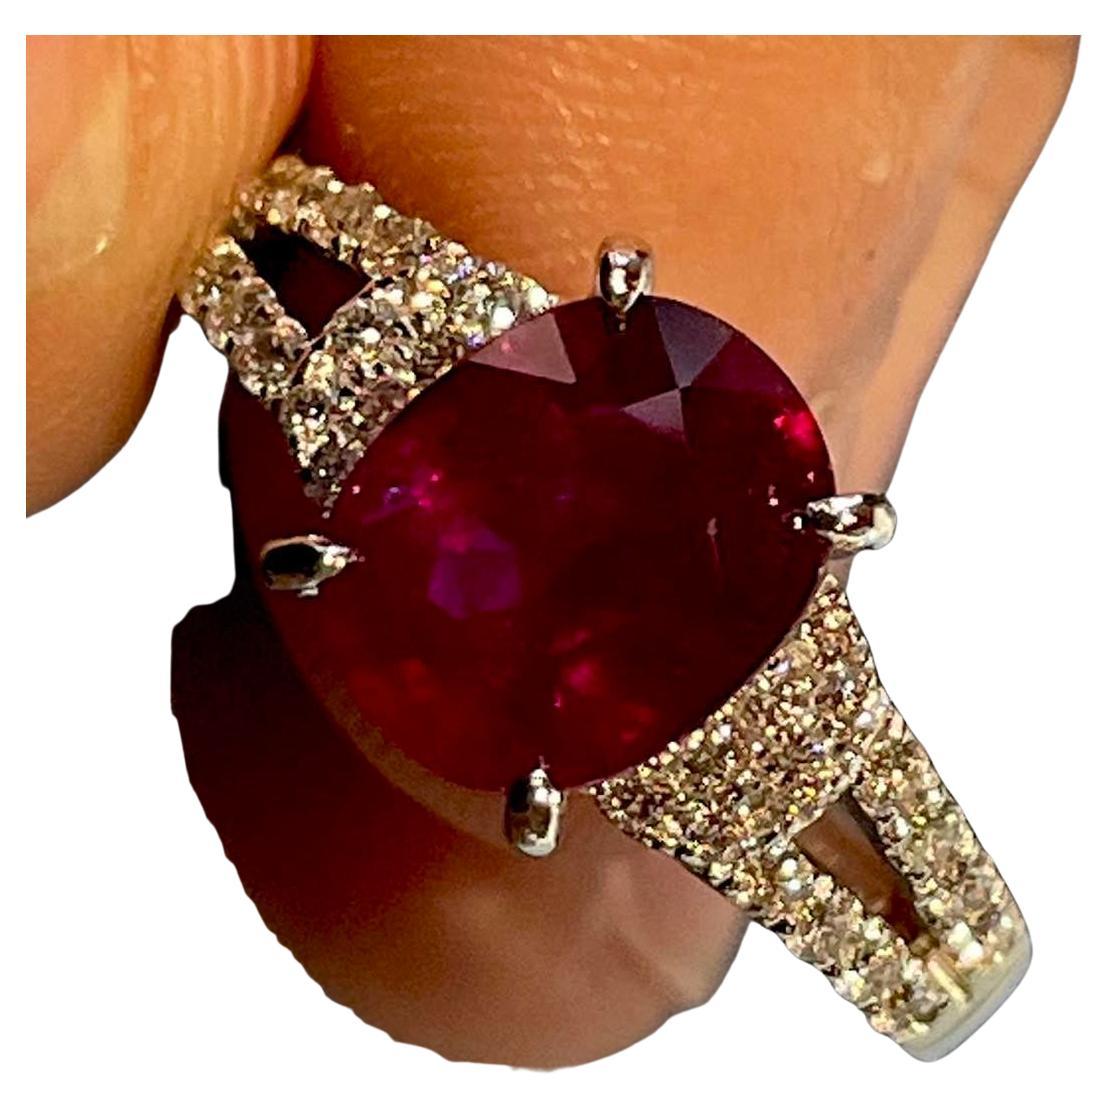 TDUGR Certfied Ruby Ring 2.37 carats For Sale